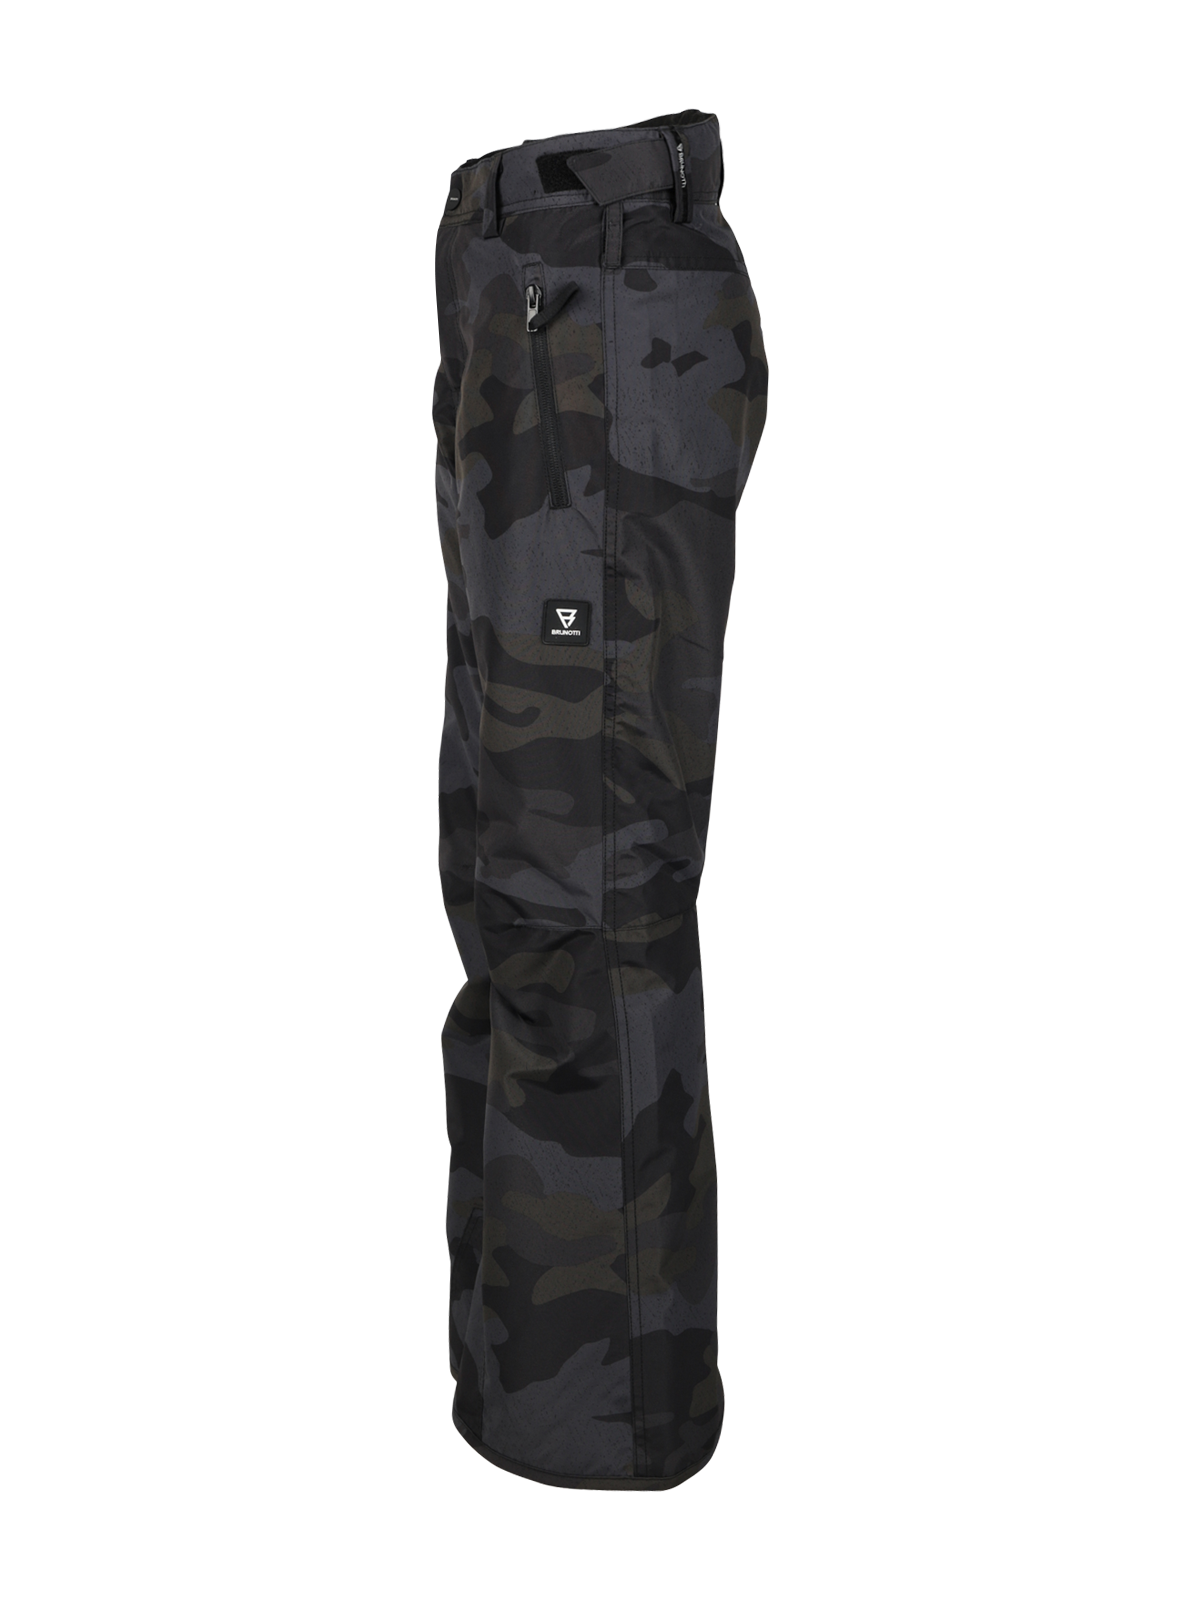 Footraily-AO Boys Snow Pants | Camouflage Grey